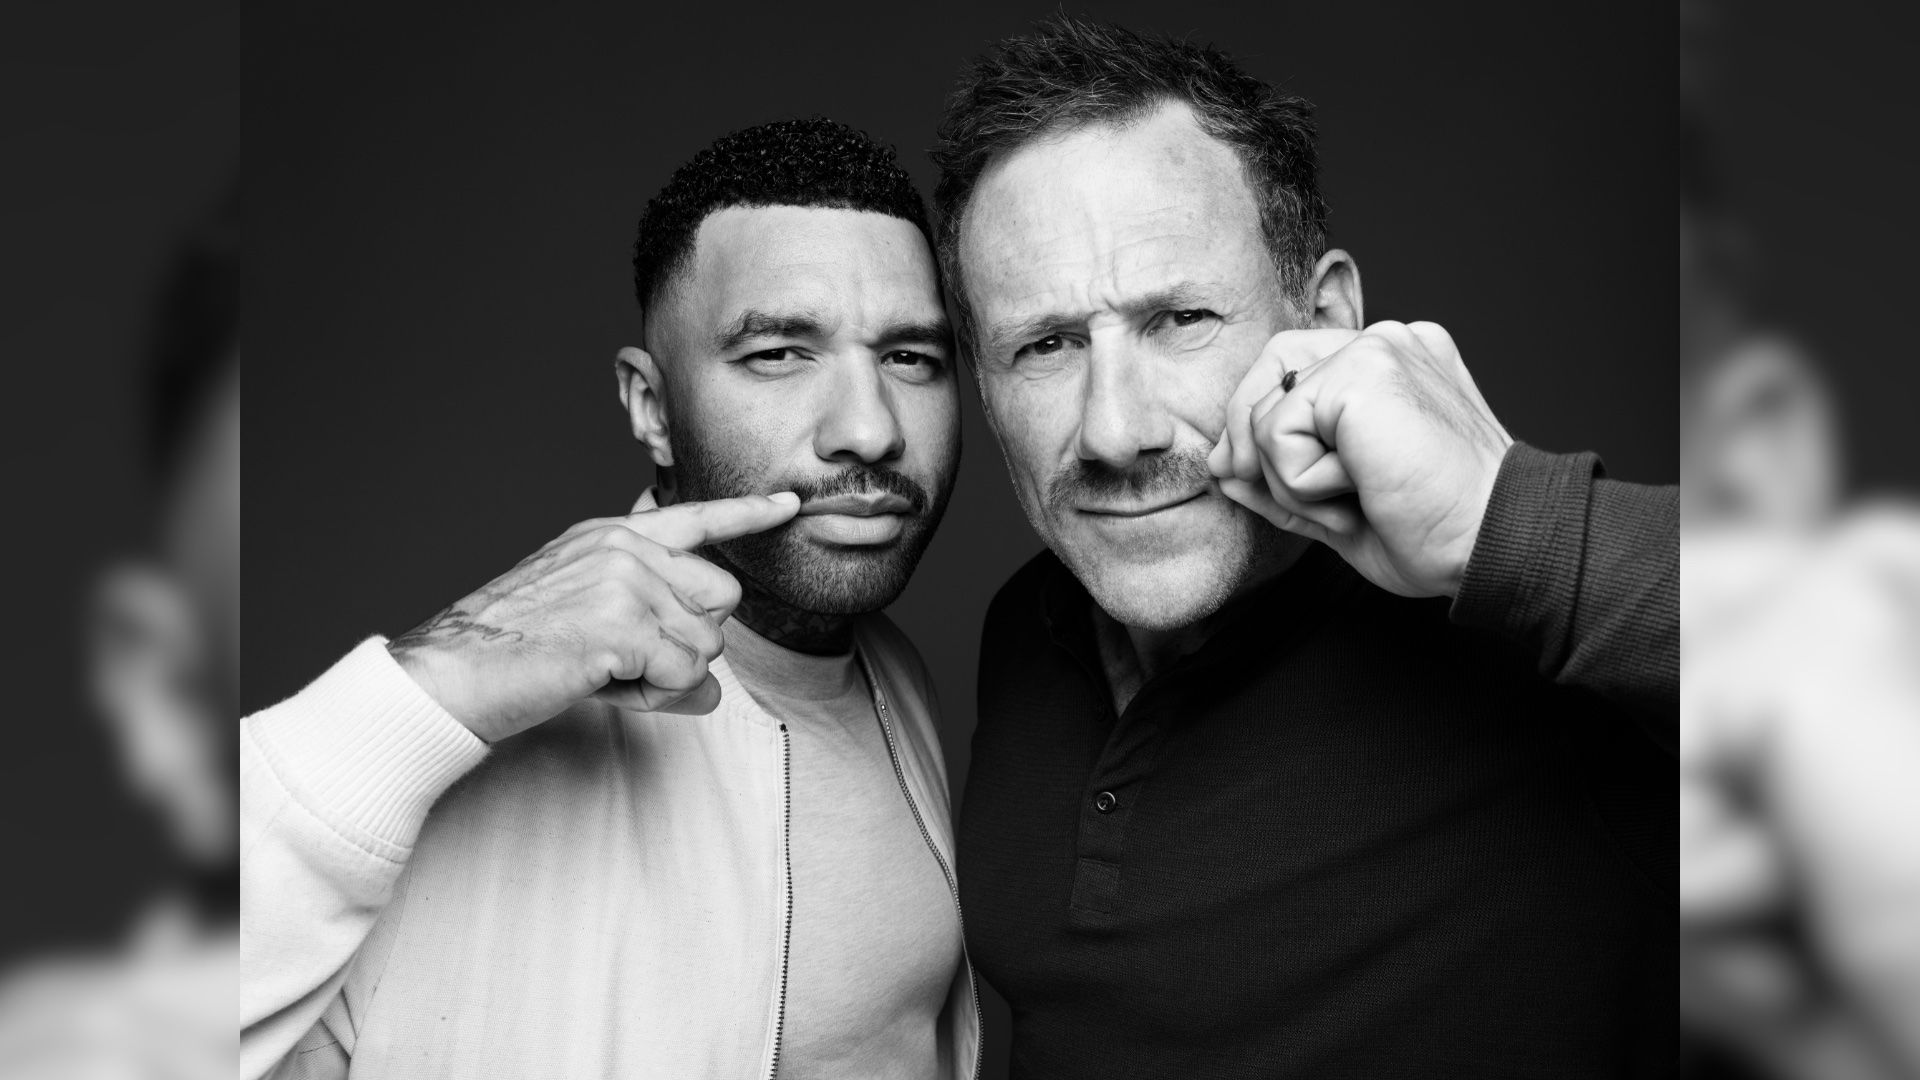 Jermaine Pennant and Jason Fox posing with their Mo's